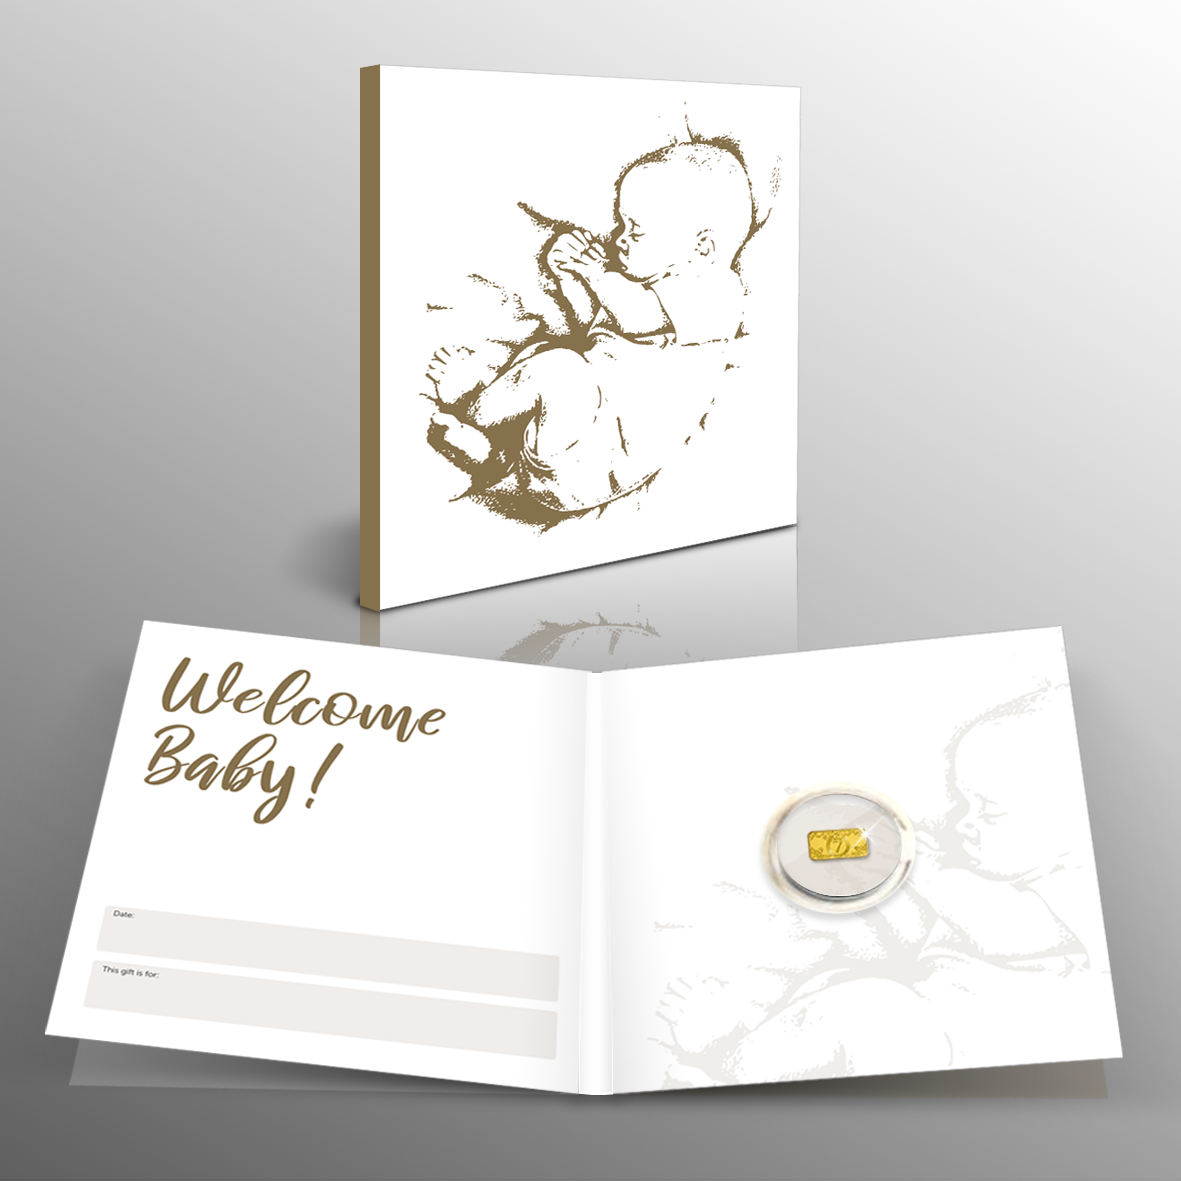 The Pure Gold ‘New Baby’ Lucky Ingot is an unusual and thoughtful gift that makes for the perfect sentimental keepsake, bringing luck for a lifetime!